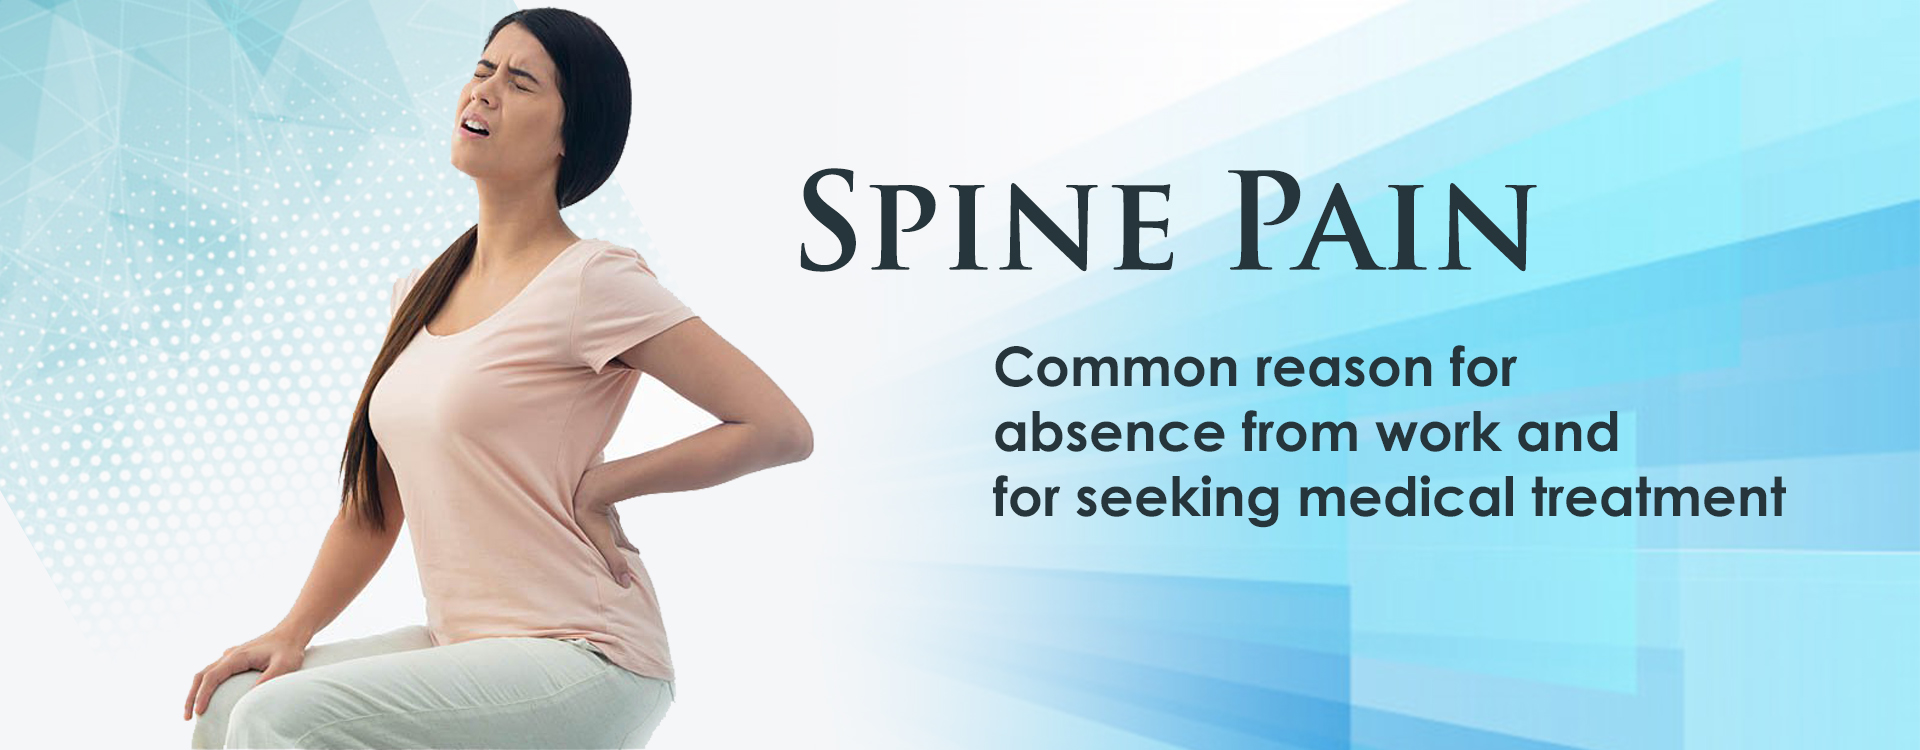 Spine Pain Treatment, Back Pain, Pain Relief Treatments, Best Pain Management Doctor in Ahmedabad, Pain Management Specialist in ahmedabad, Best Pain Management Near me